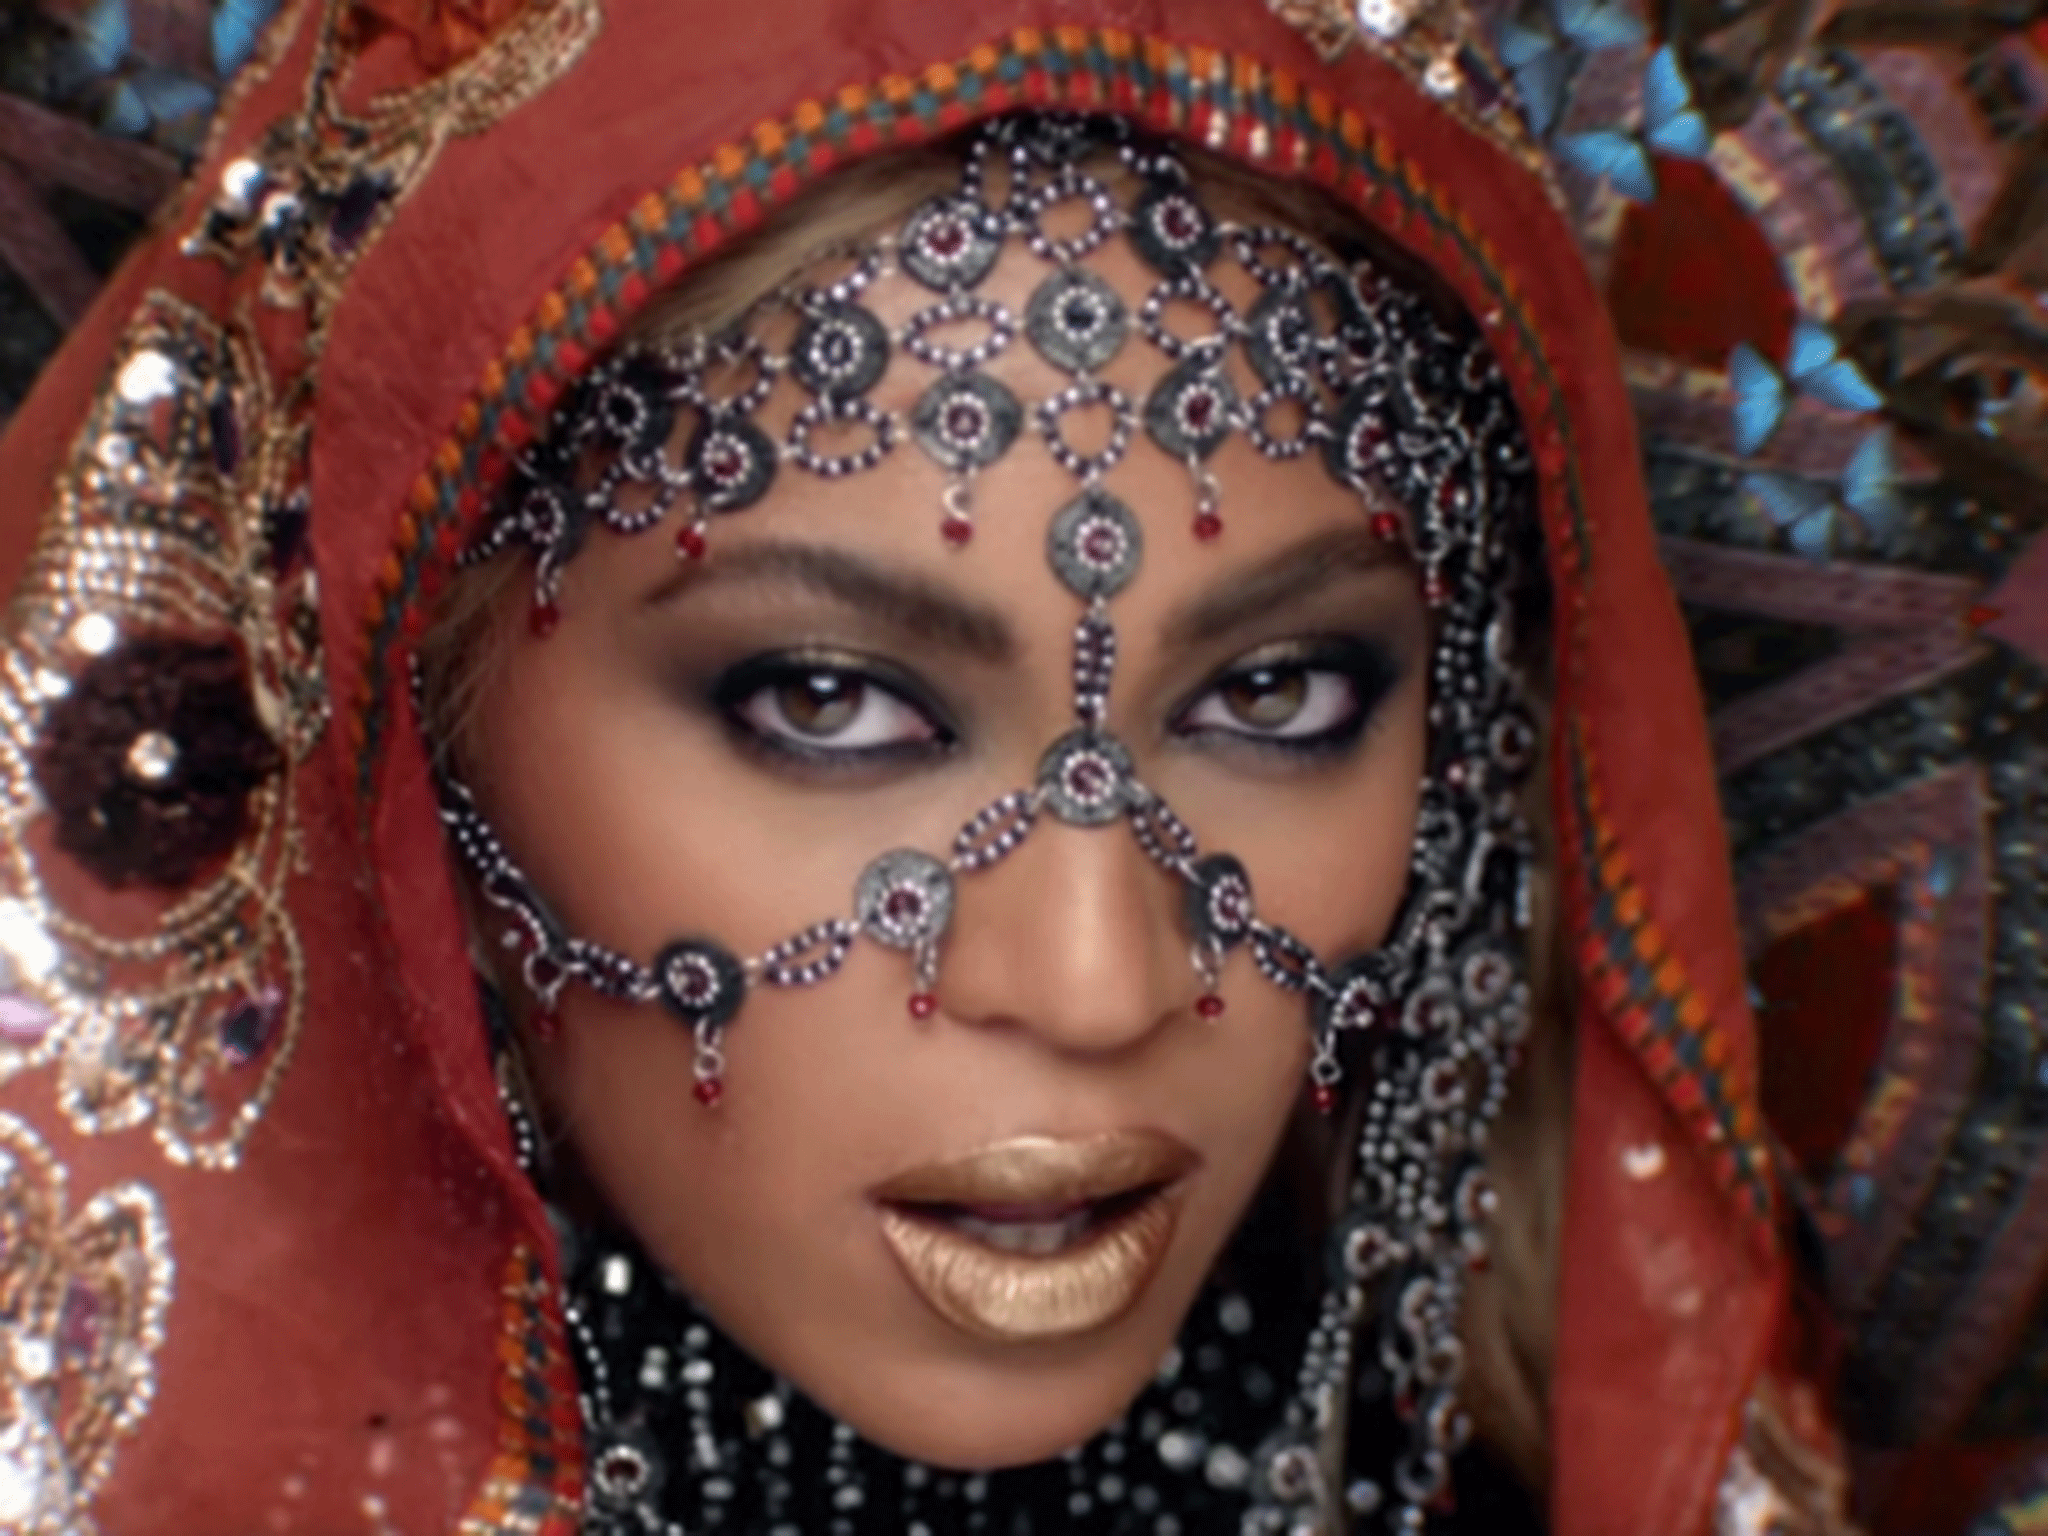 Beyoncé appearing in the music video for Coldplay's Hymn for the Weekend